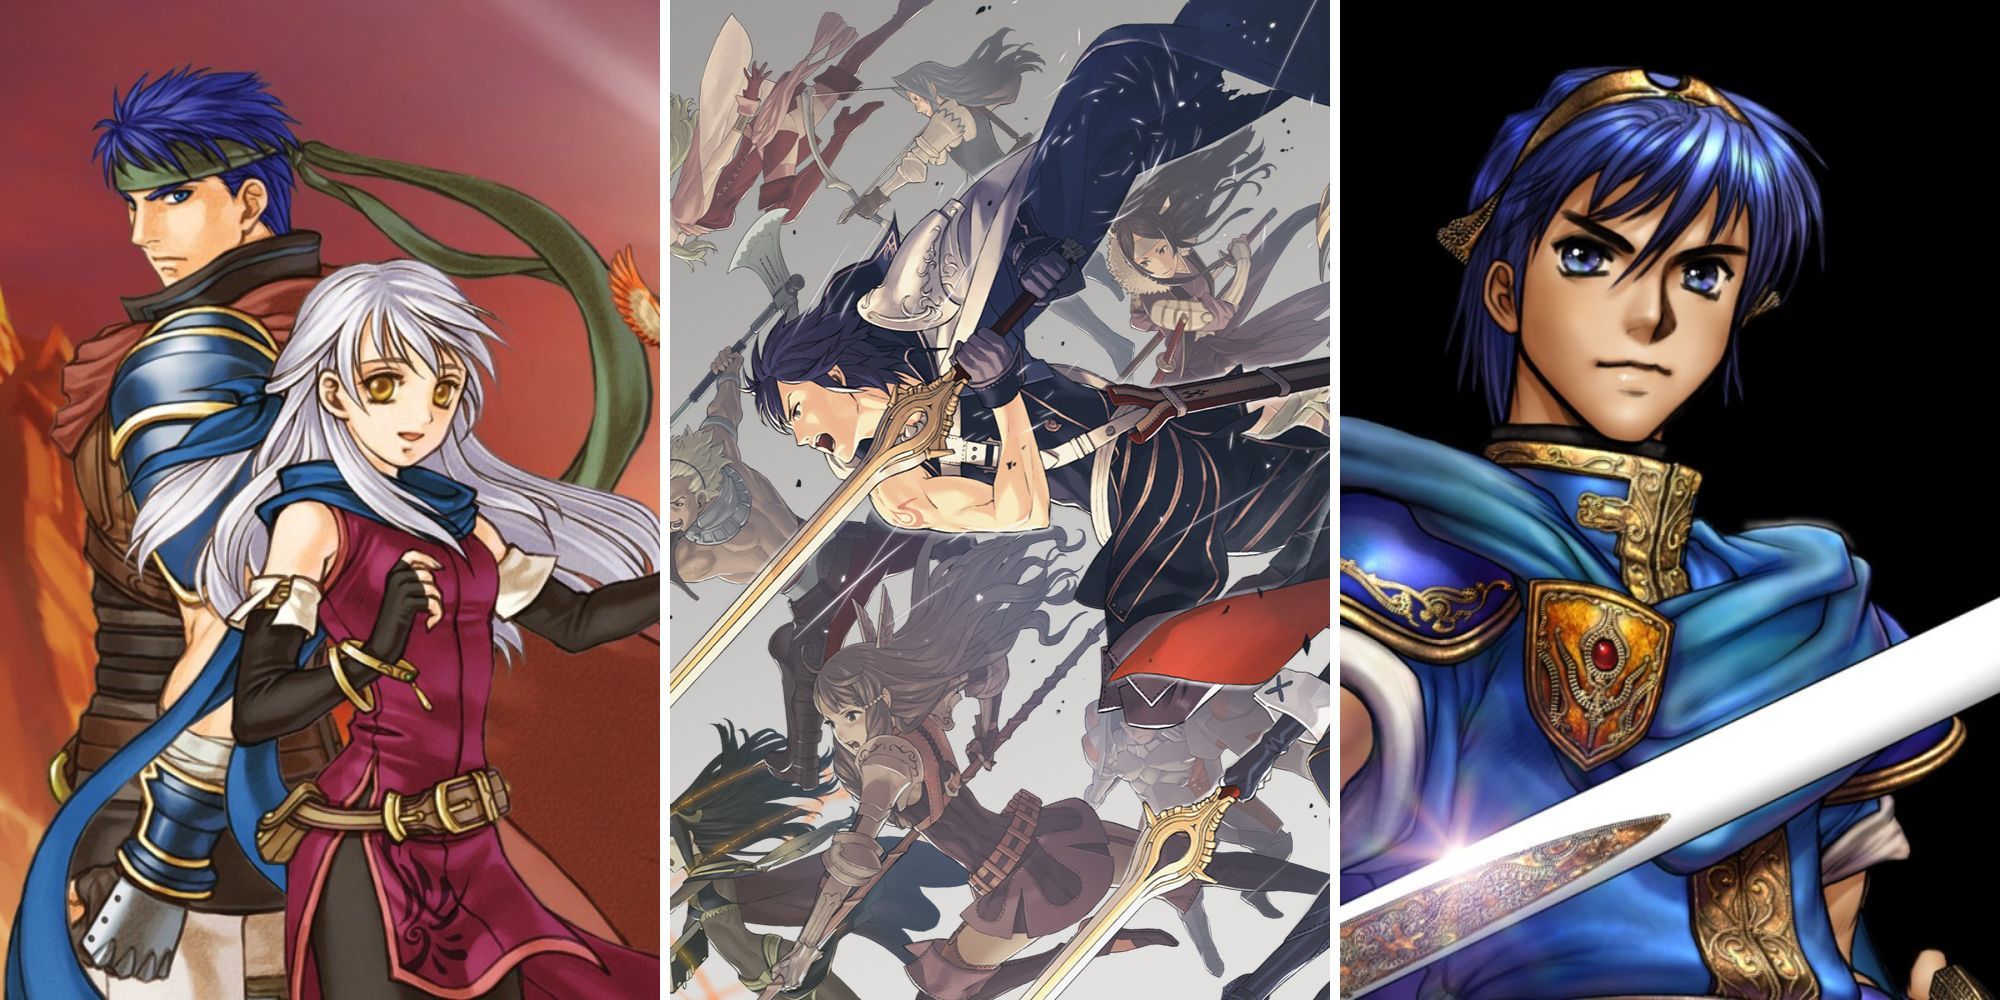 A grid of three images showing the cover art to the games Fire Emblem: Radiant Dawn, Fire Emblem: Awakening. and Fire Emblem: Shadow Dragon